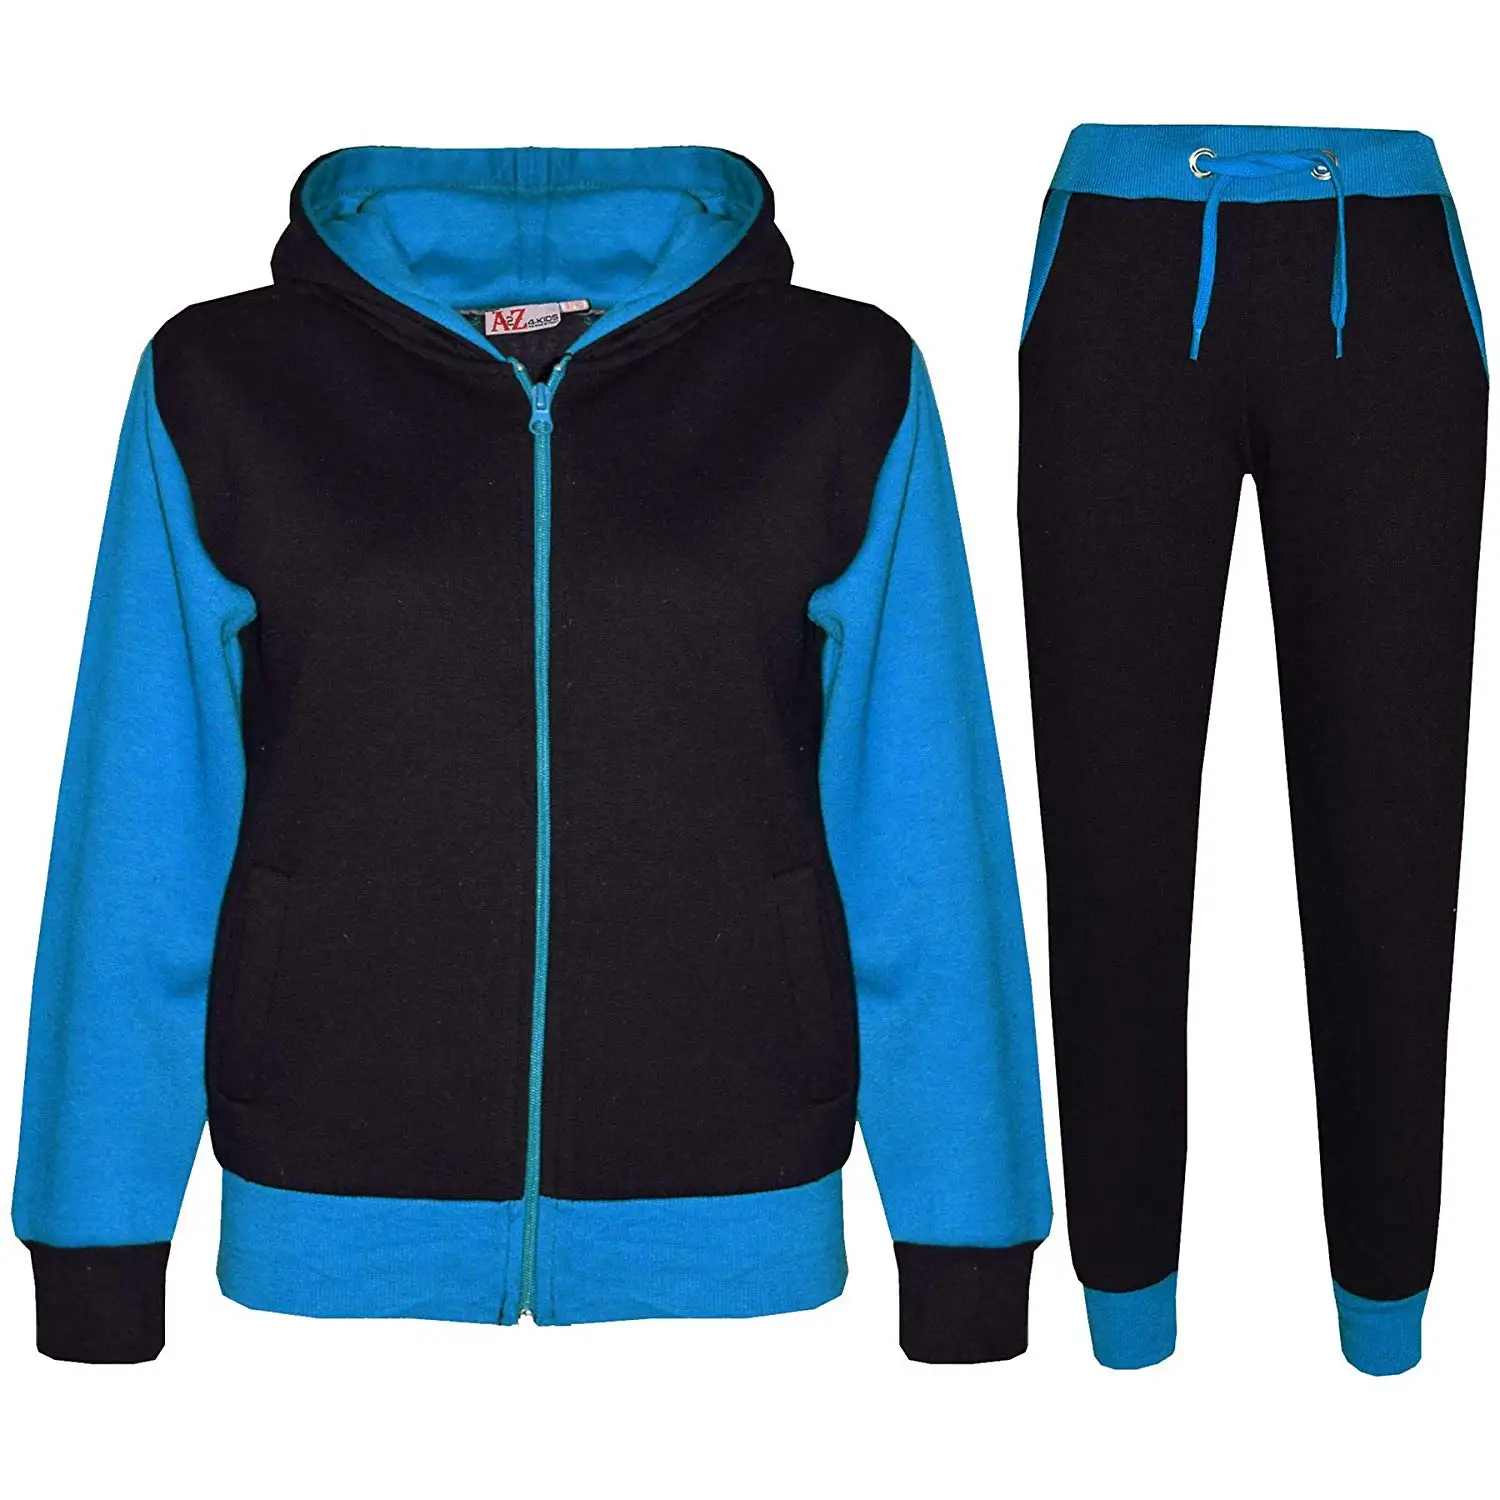 polo jogging suits for kids